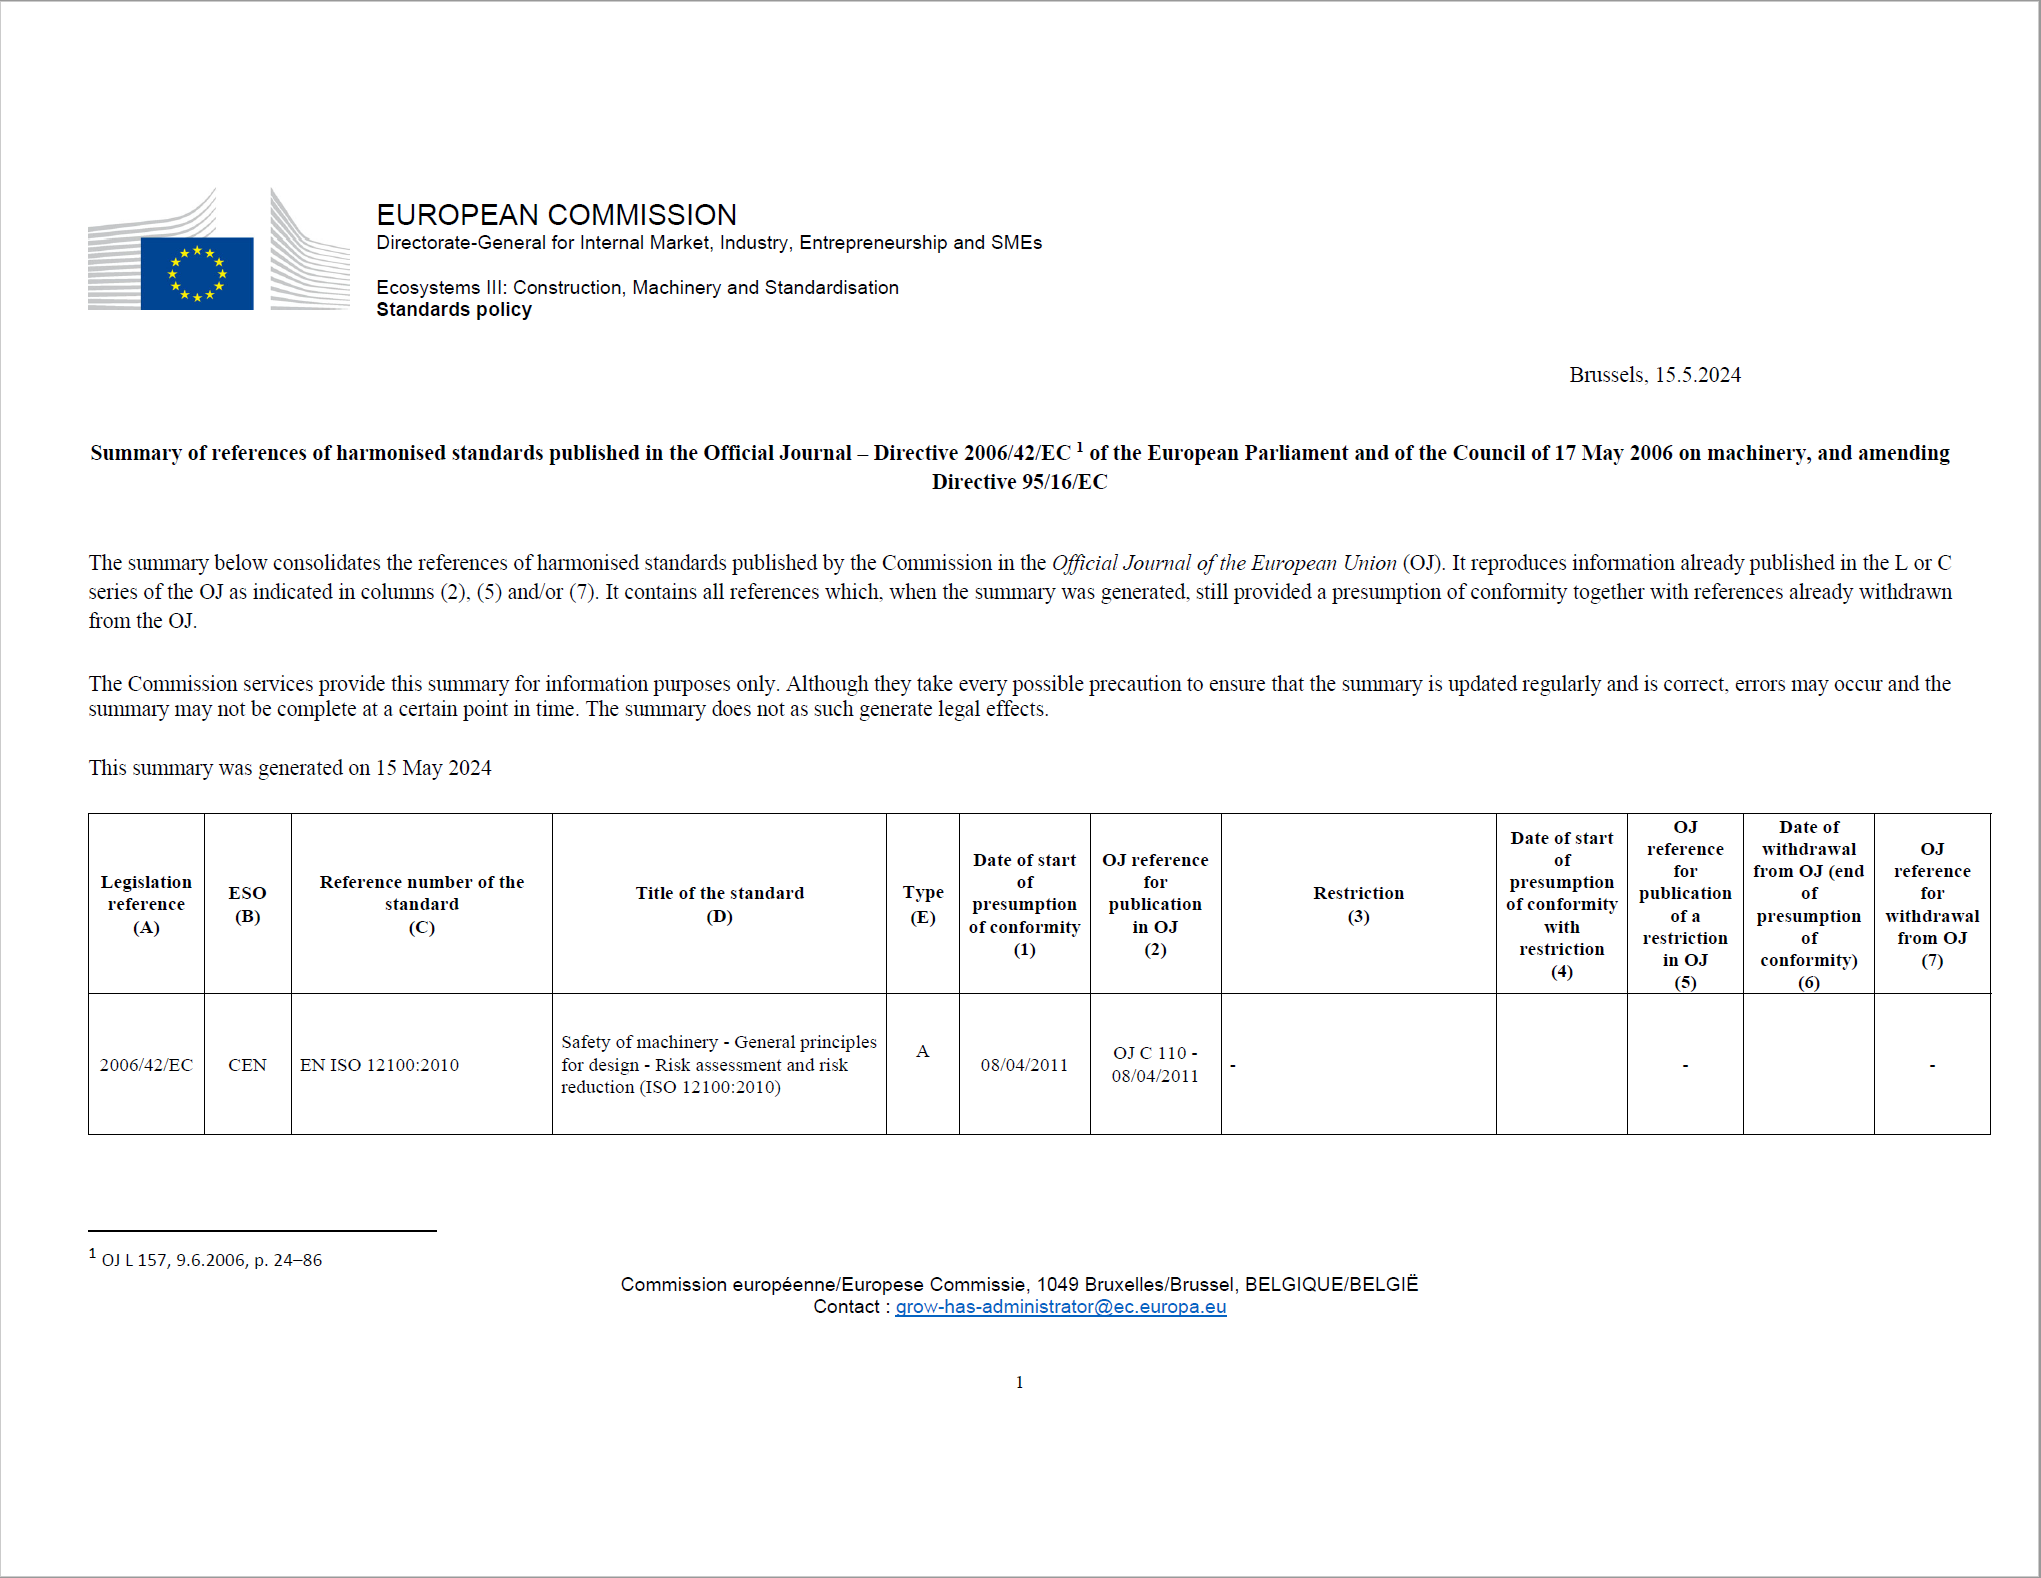 Directive 2006 42 EC   Harmonised standards published in the OJ   Update May 2024